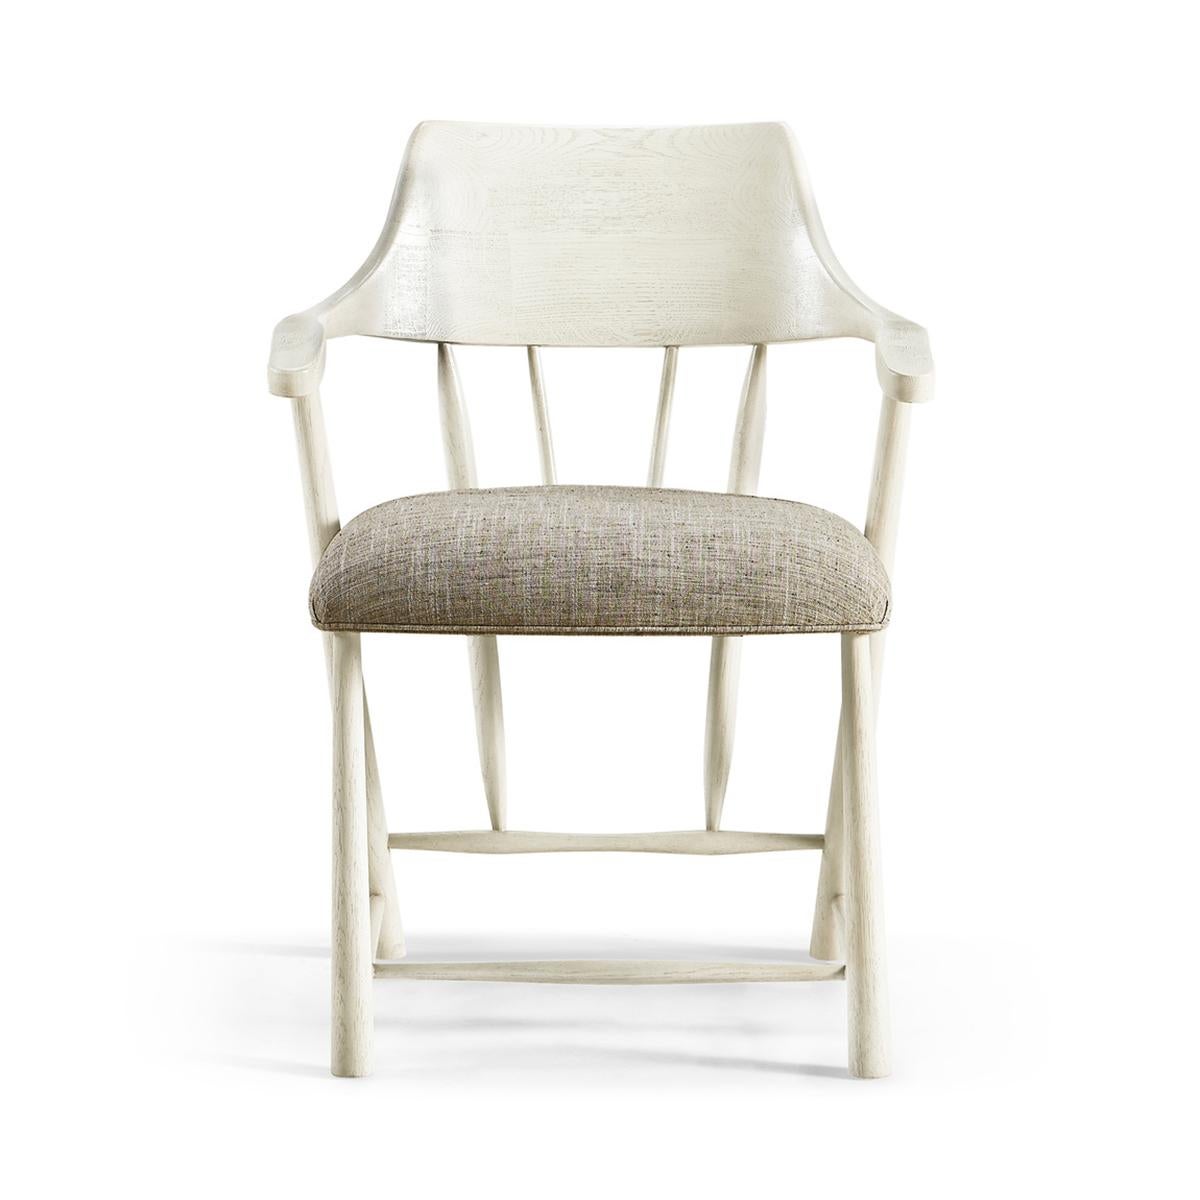 Captain's armchair - references to modern stylings and Scandanavian sentiments. The solid hardwood frame is finished in zinc white with interlocking supports for a clean and minimal aesthetic. An upholstered seat covered in Kravet fabric provides